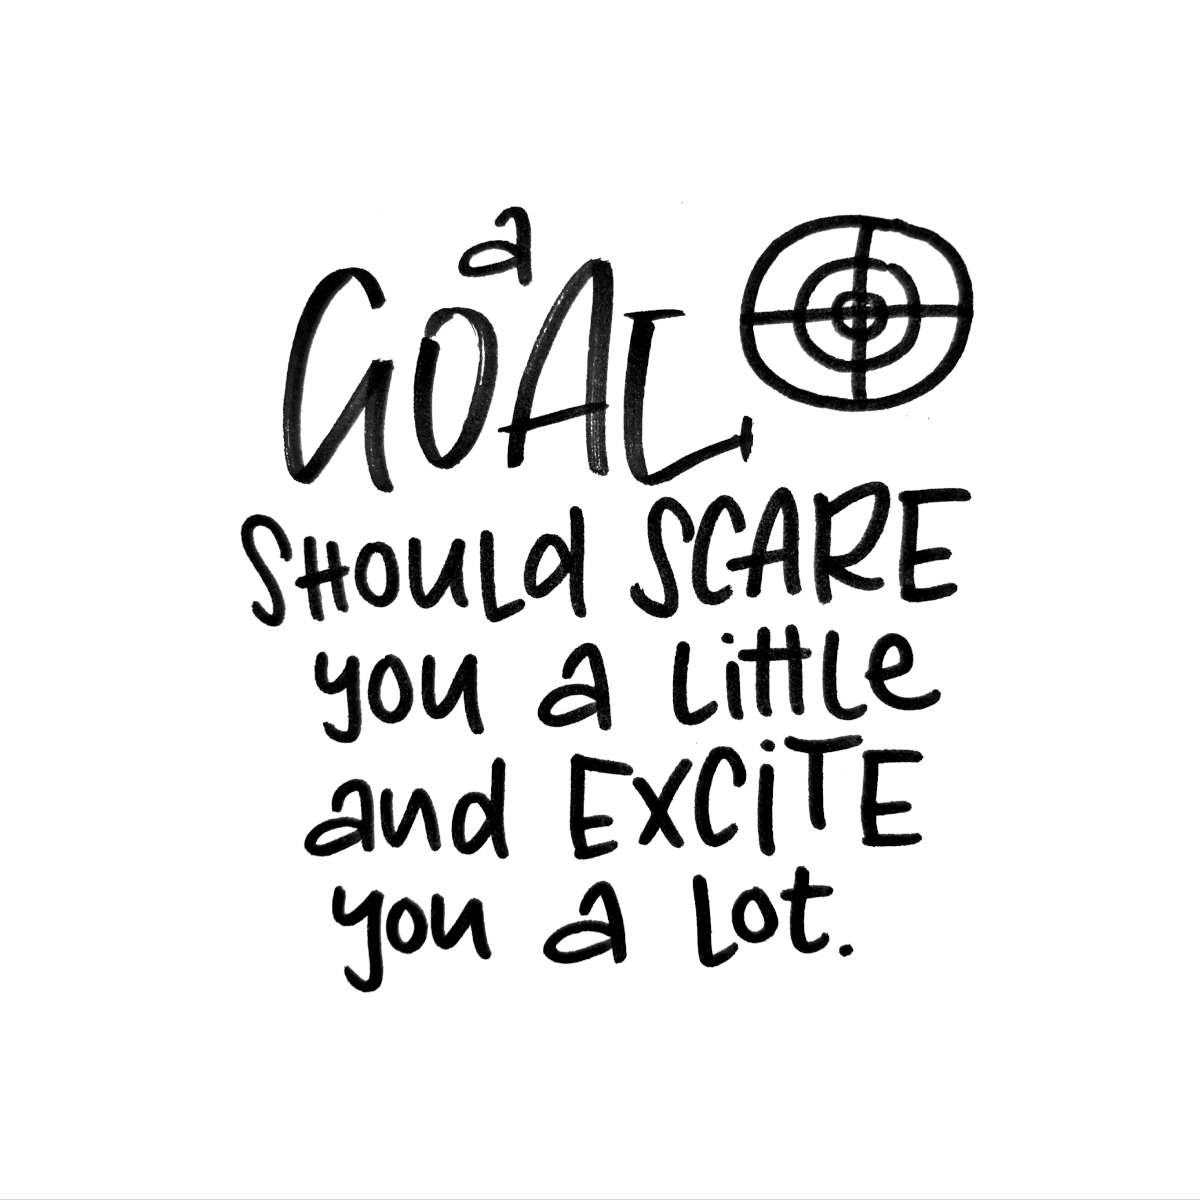 A goal should scare you a little and excite you a lot.